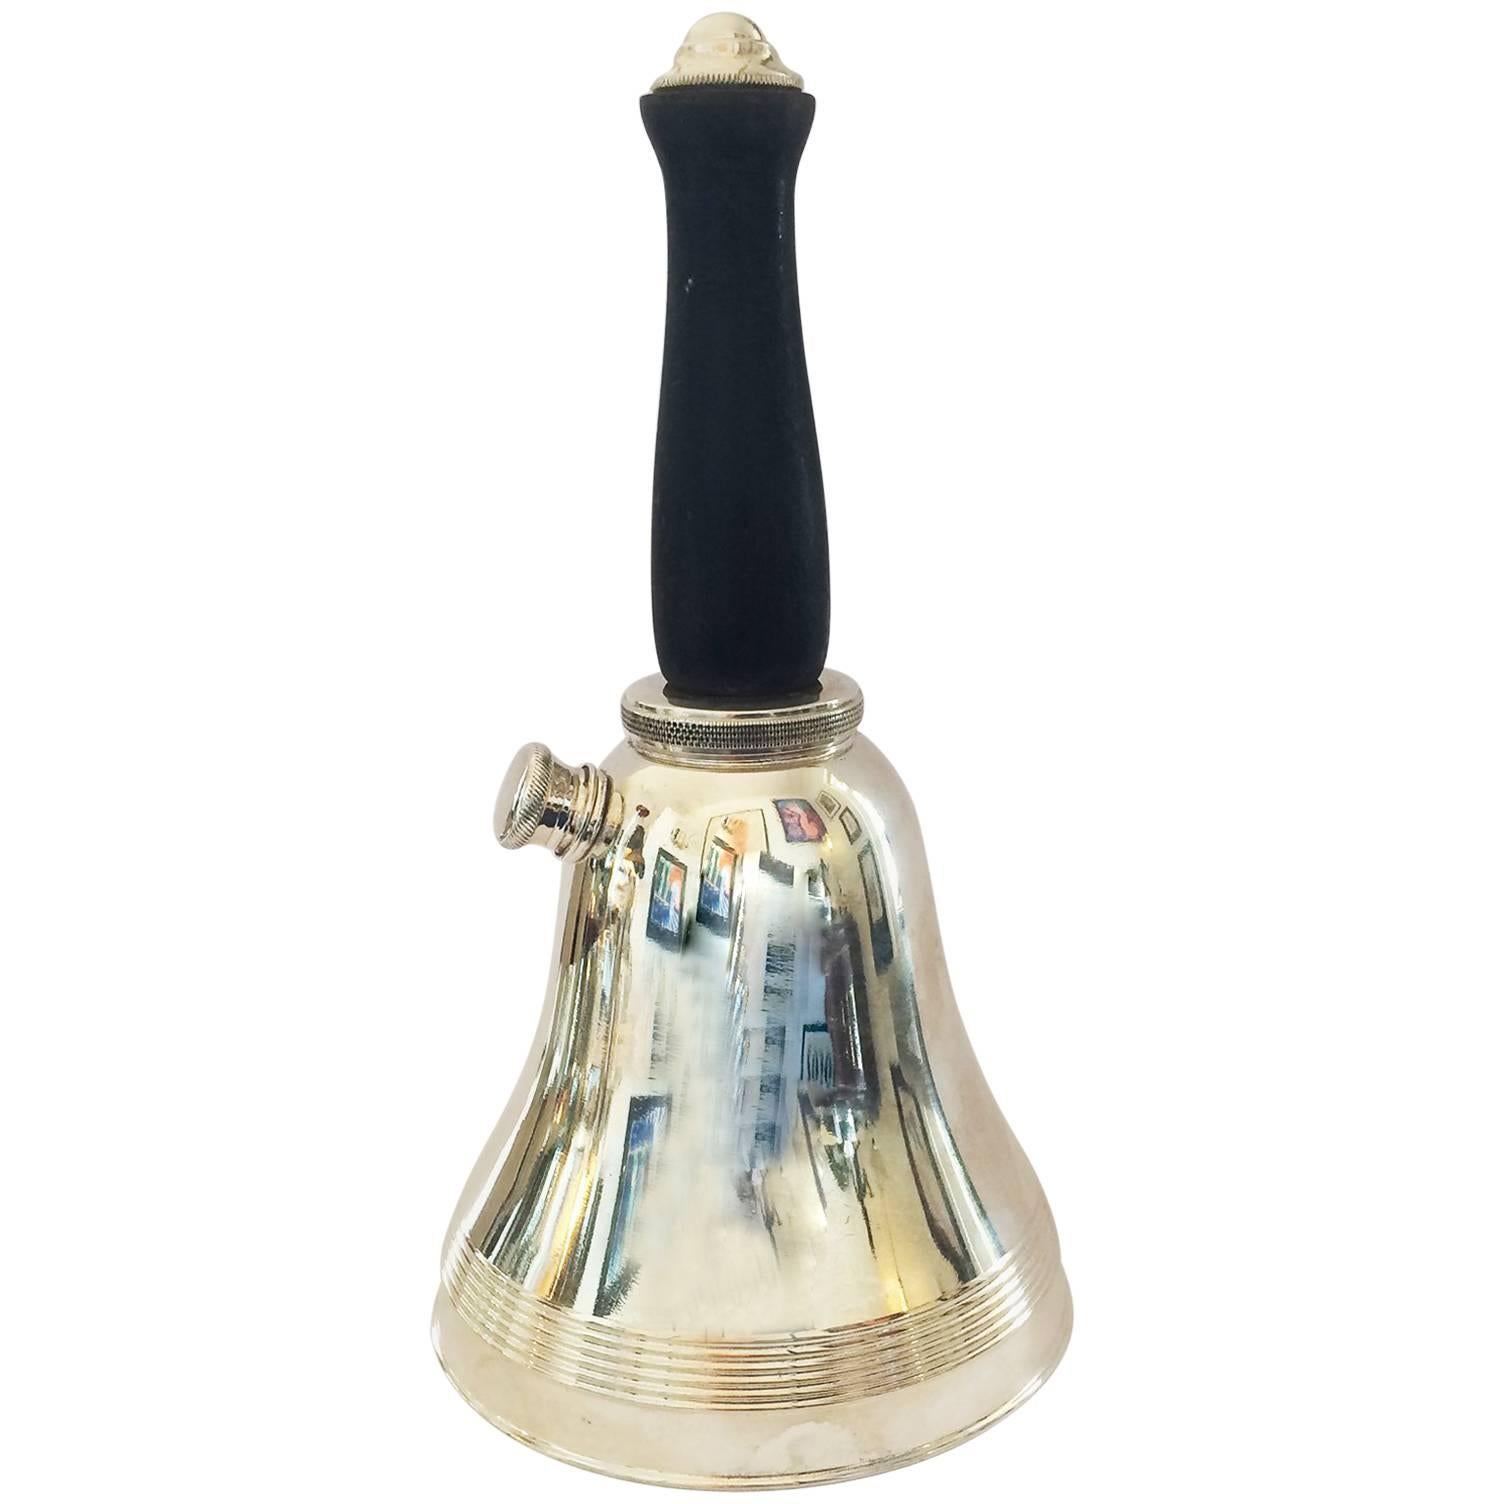 Art Deco Cocktail Martini Shaker as a Bell